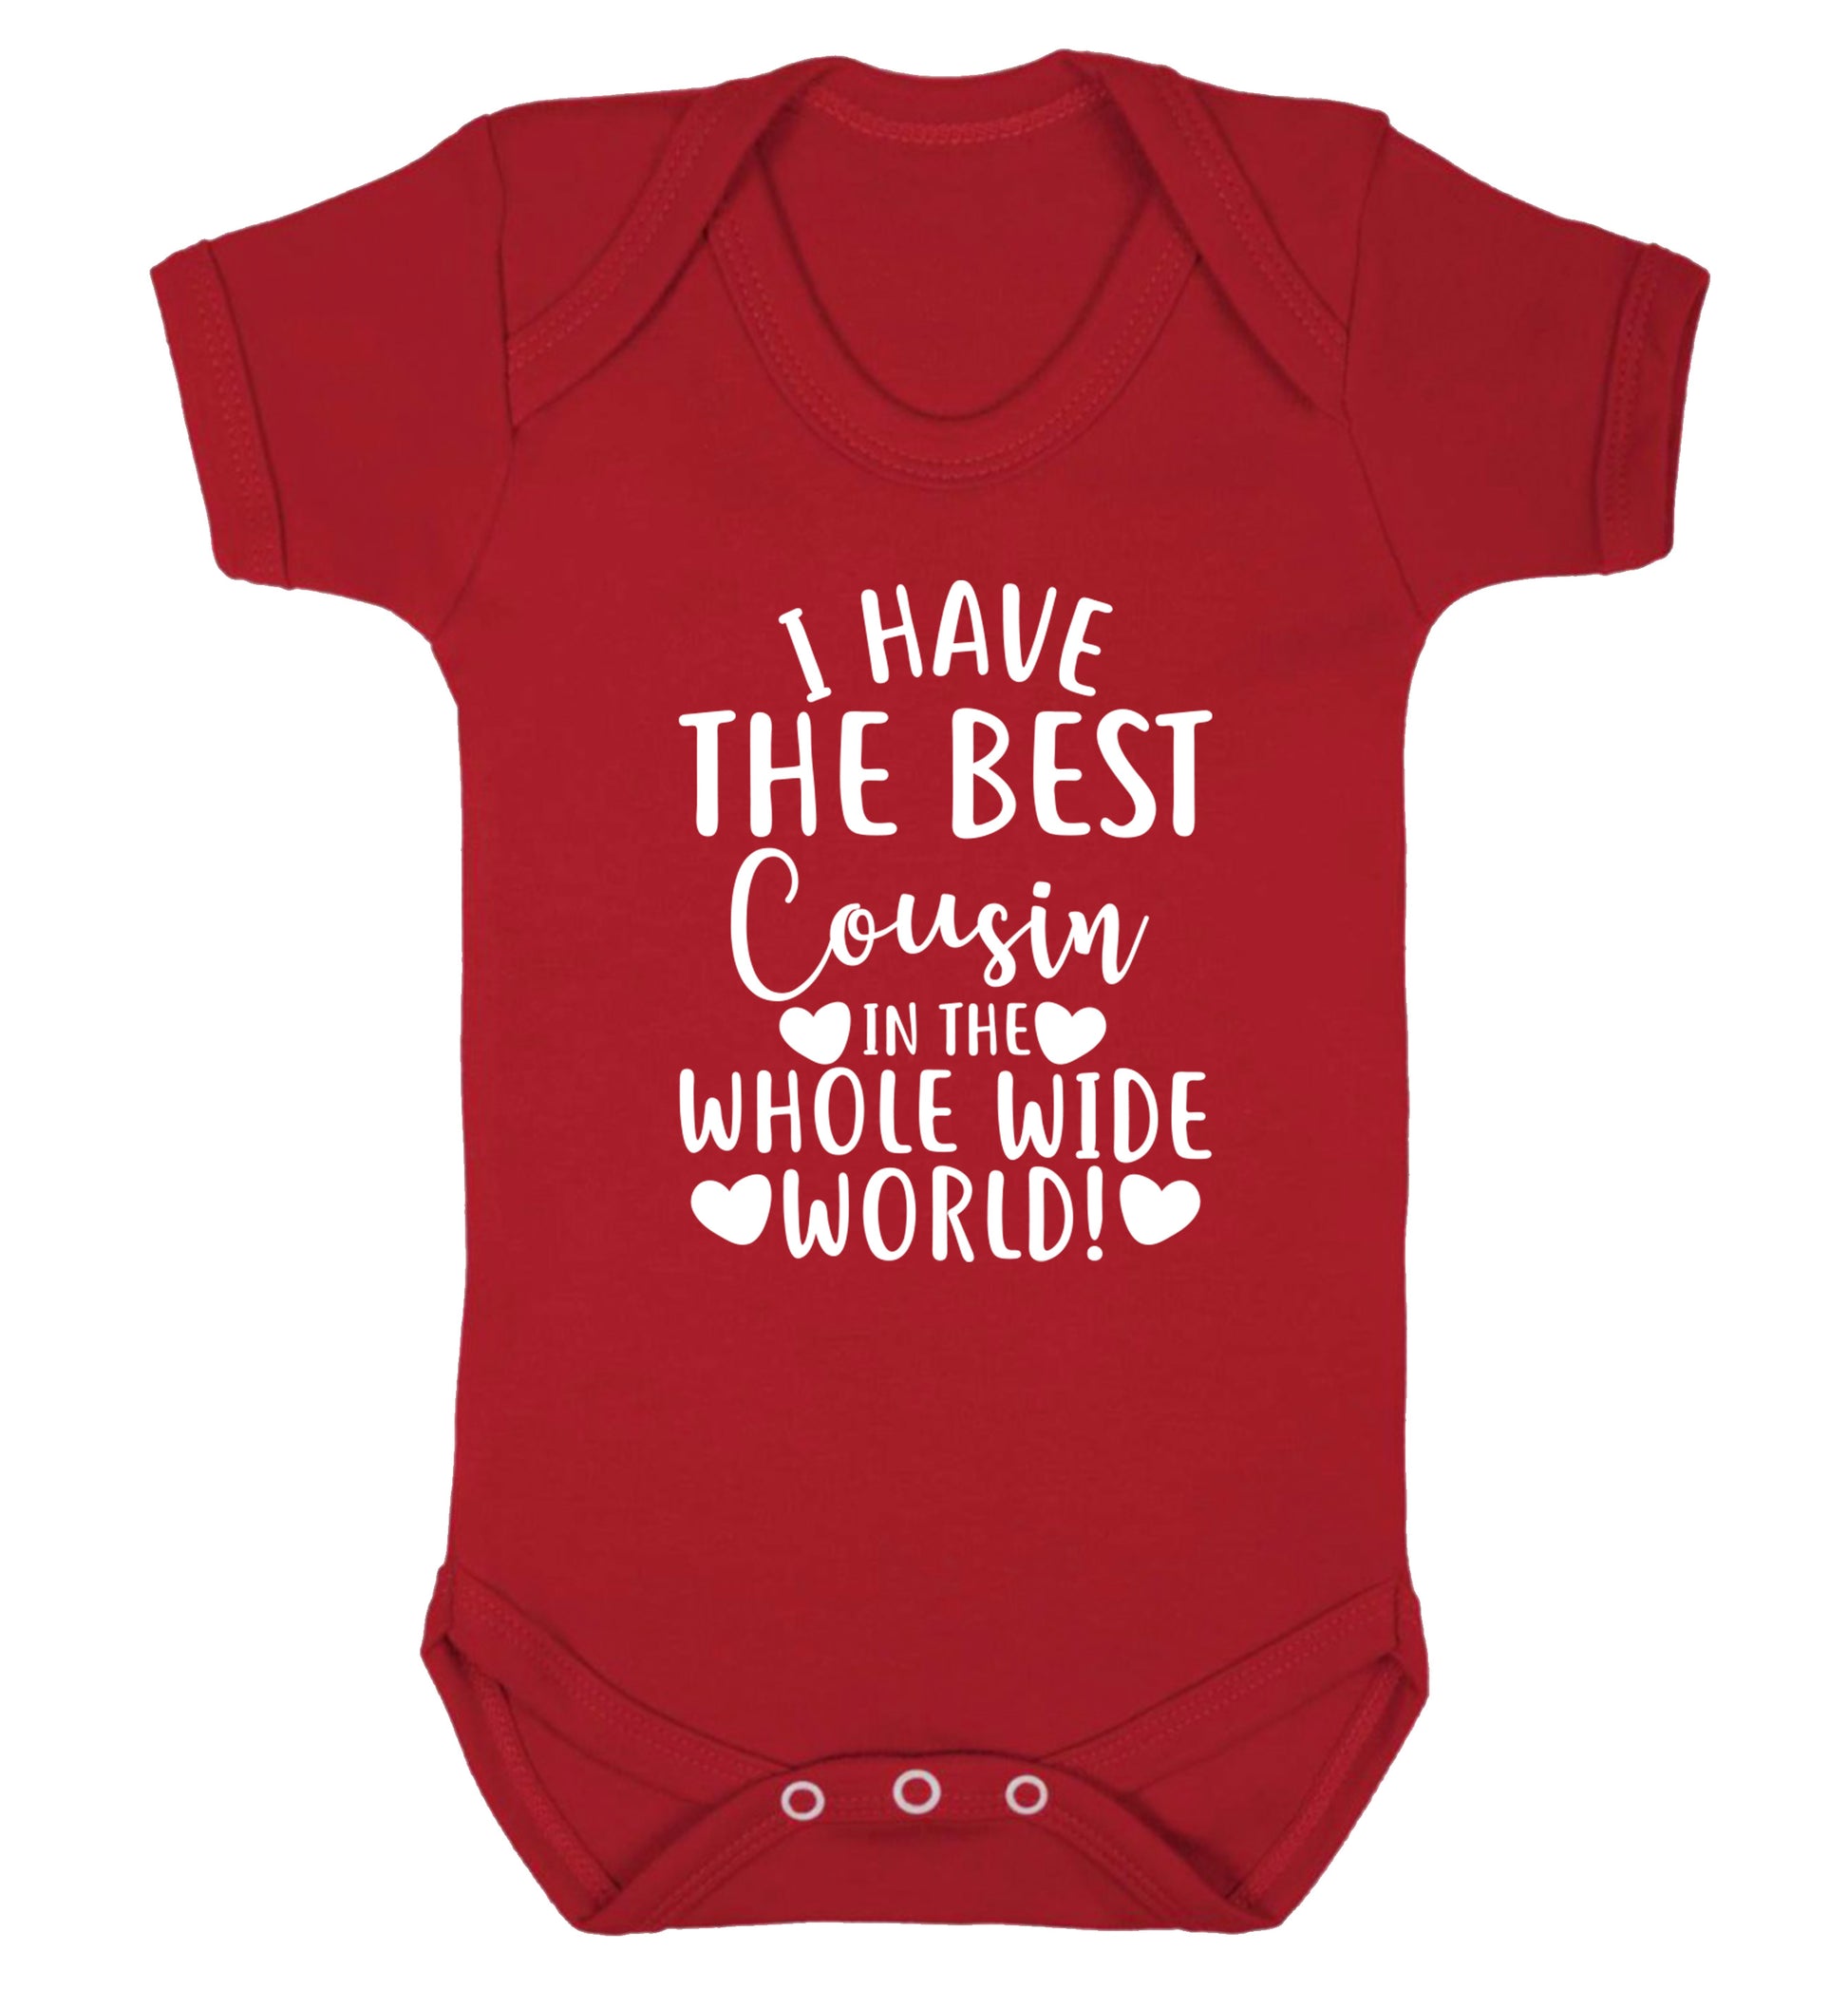 I have the best cousin in the whole wide world! Baby Vest red 18-24 months